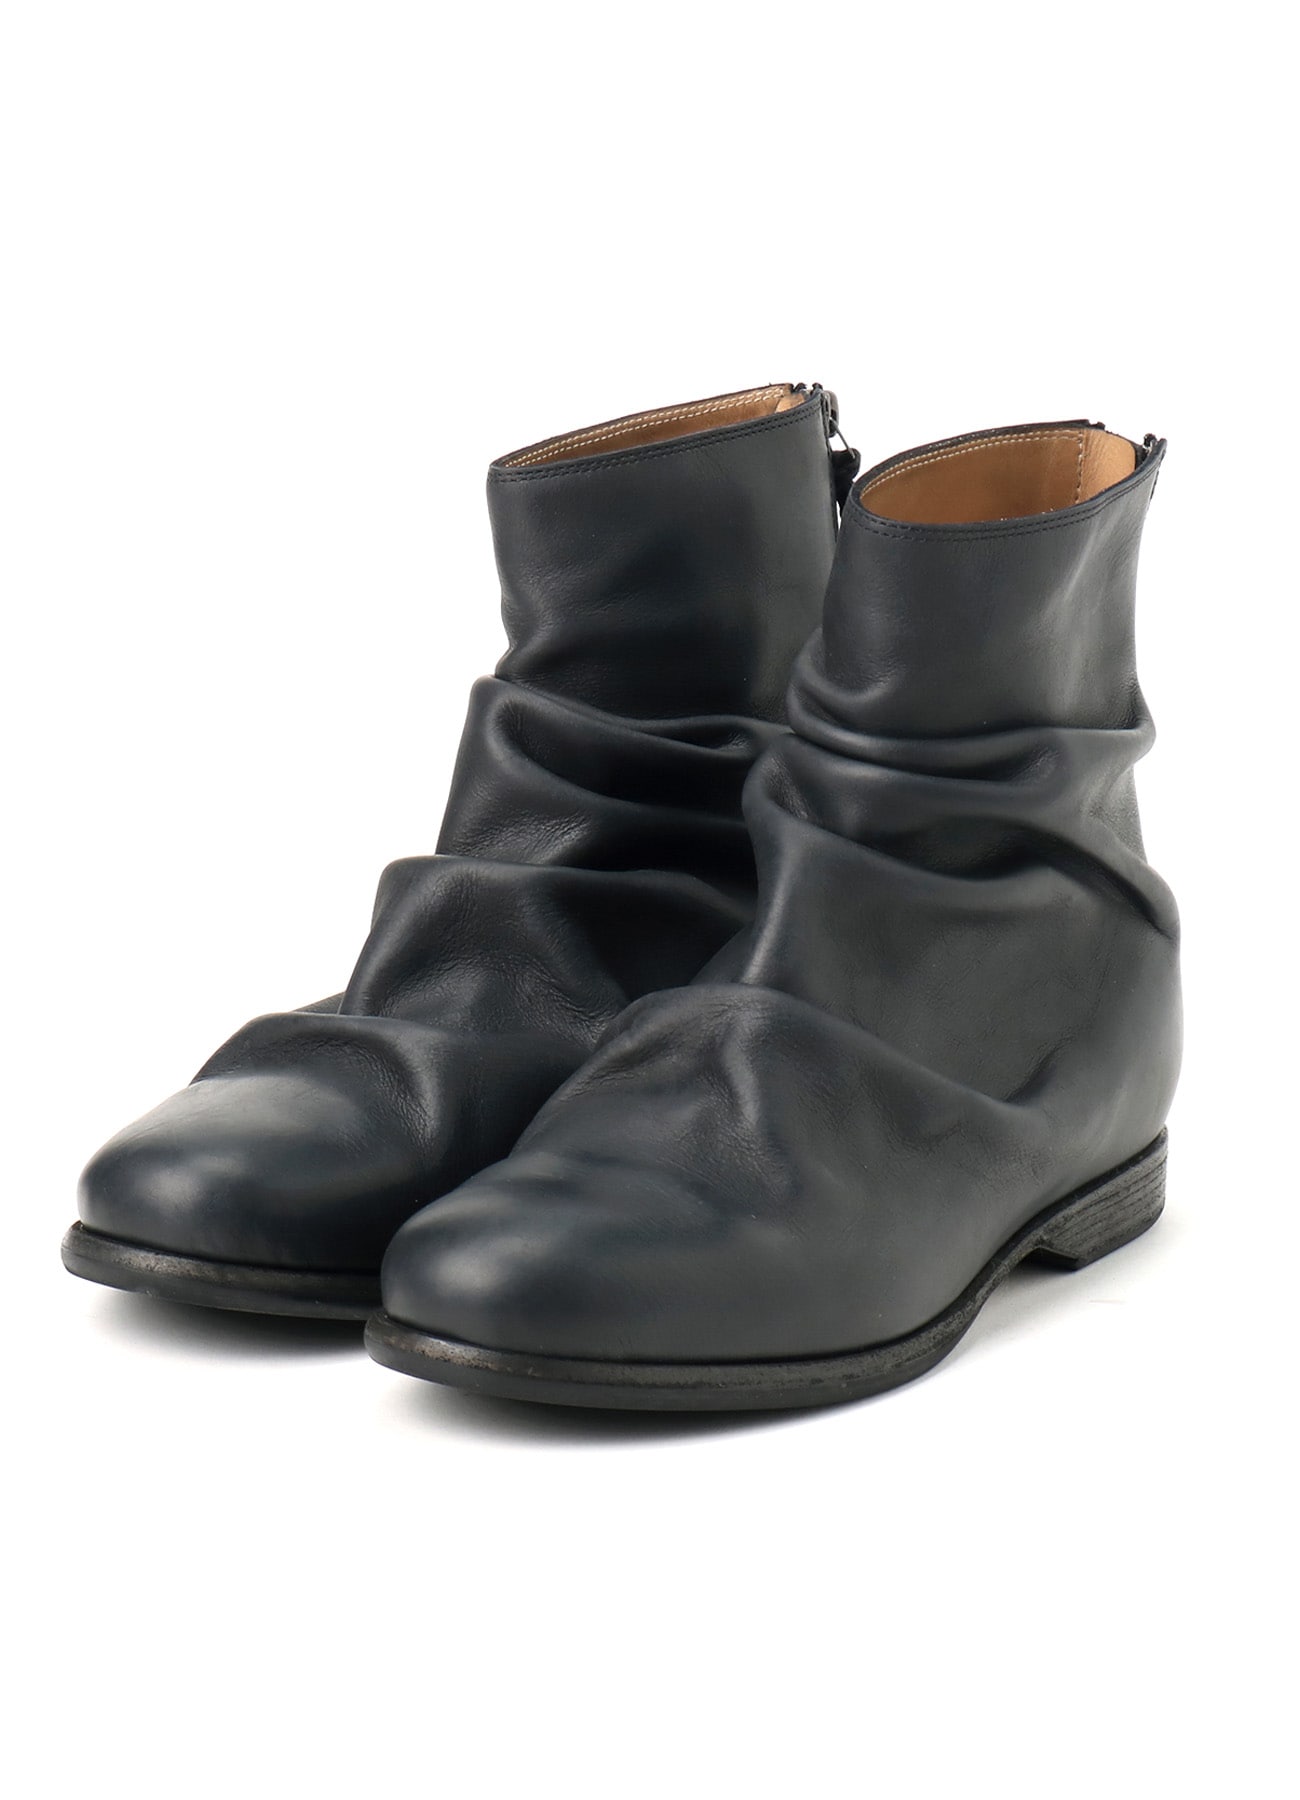 TUMBLED COWHIDE LEATHER CROPPED BOOTS(US 6 Black): Vintage｜THE 